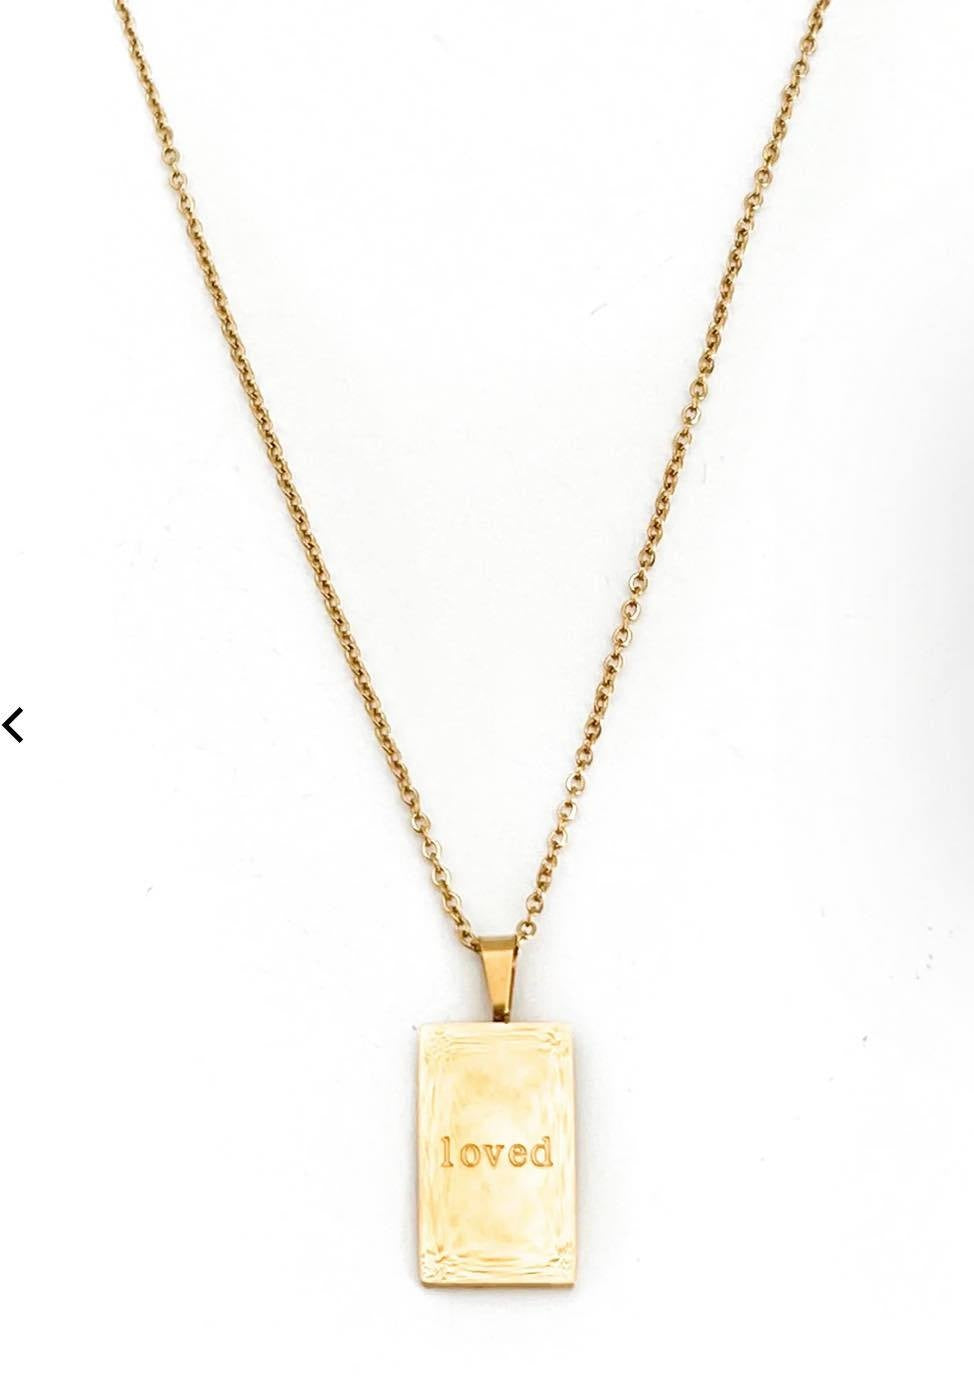 Amor necklace